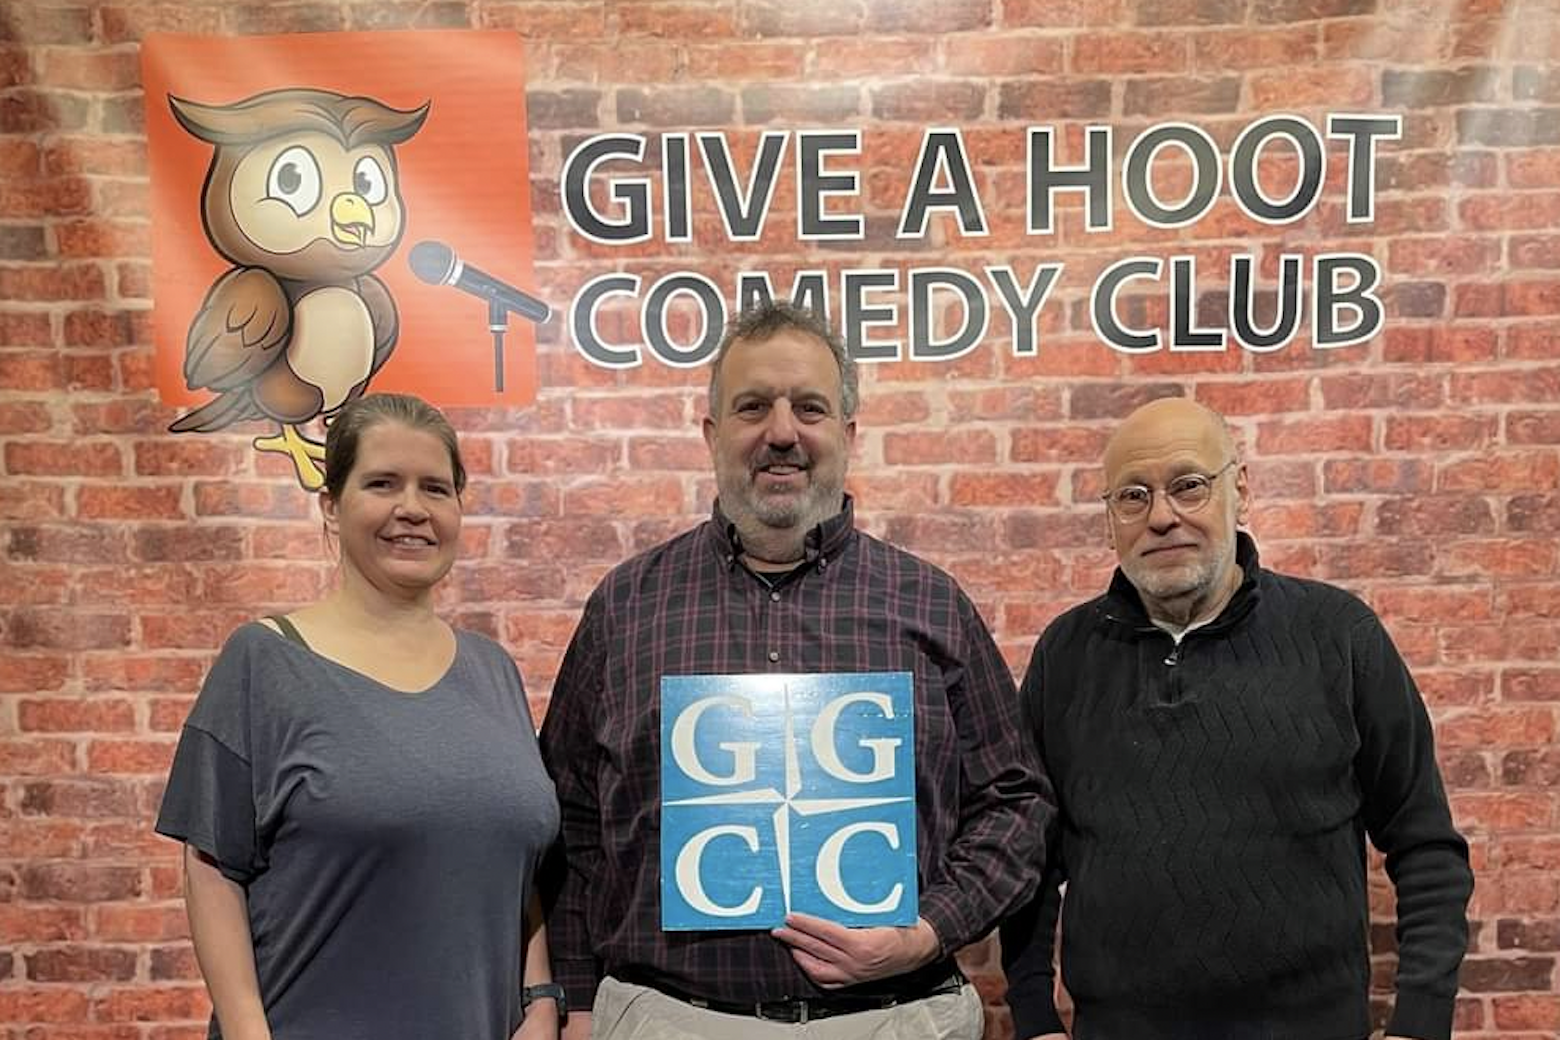 Give a Hoot Comedy Club hosts grand opening this weekend in Gaithersburg -  WTOP News